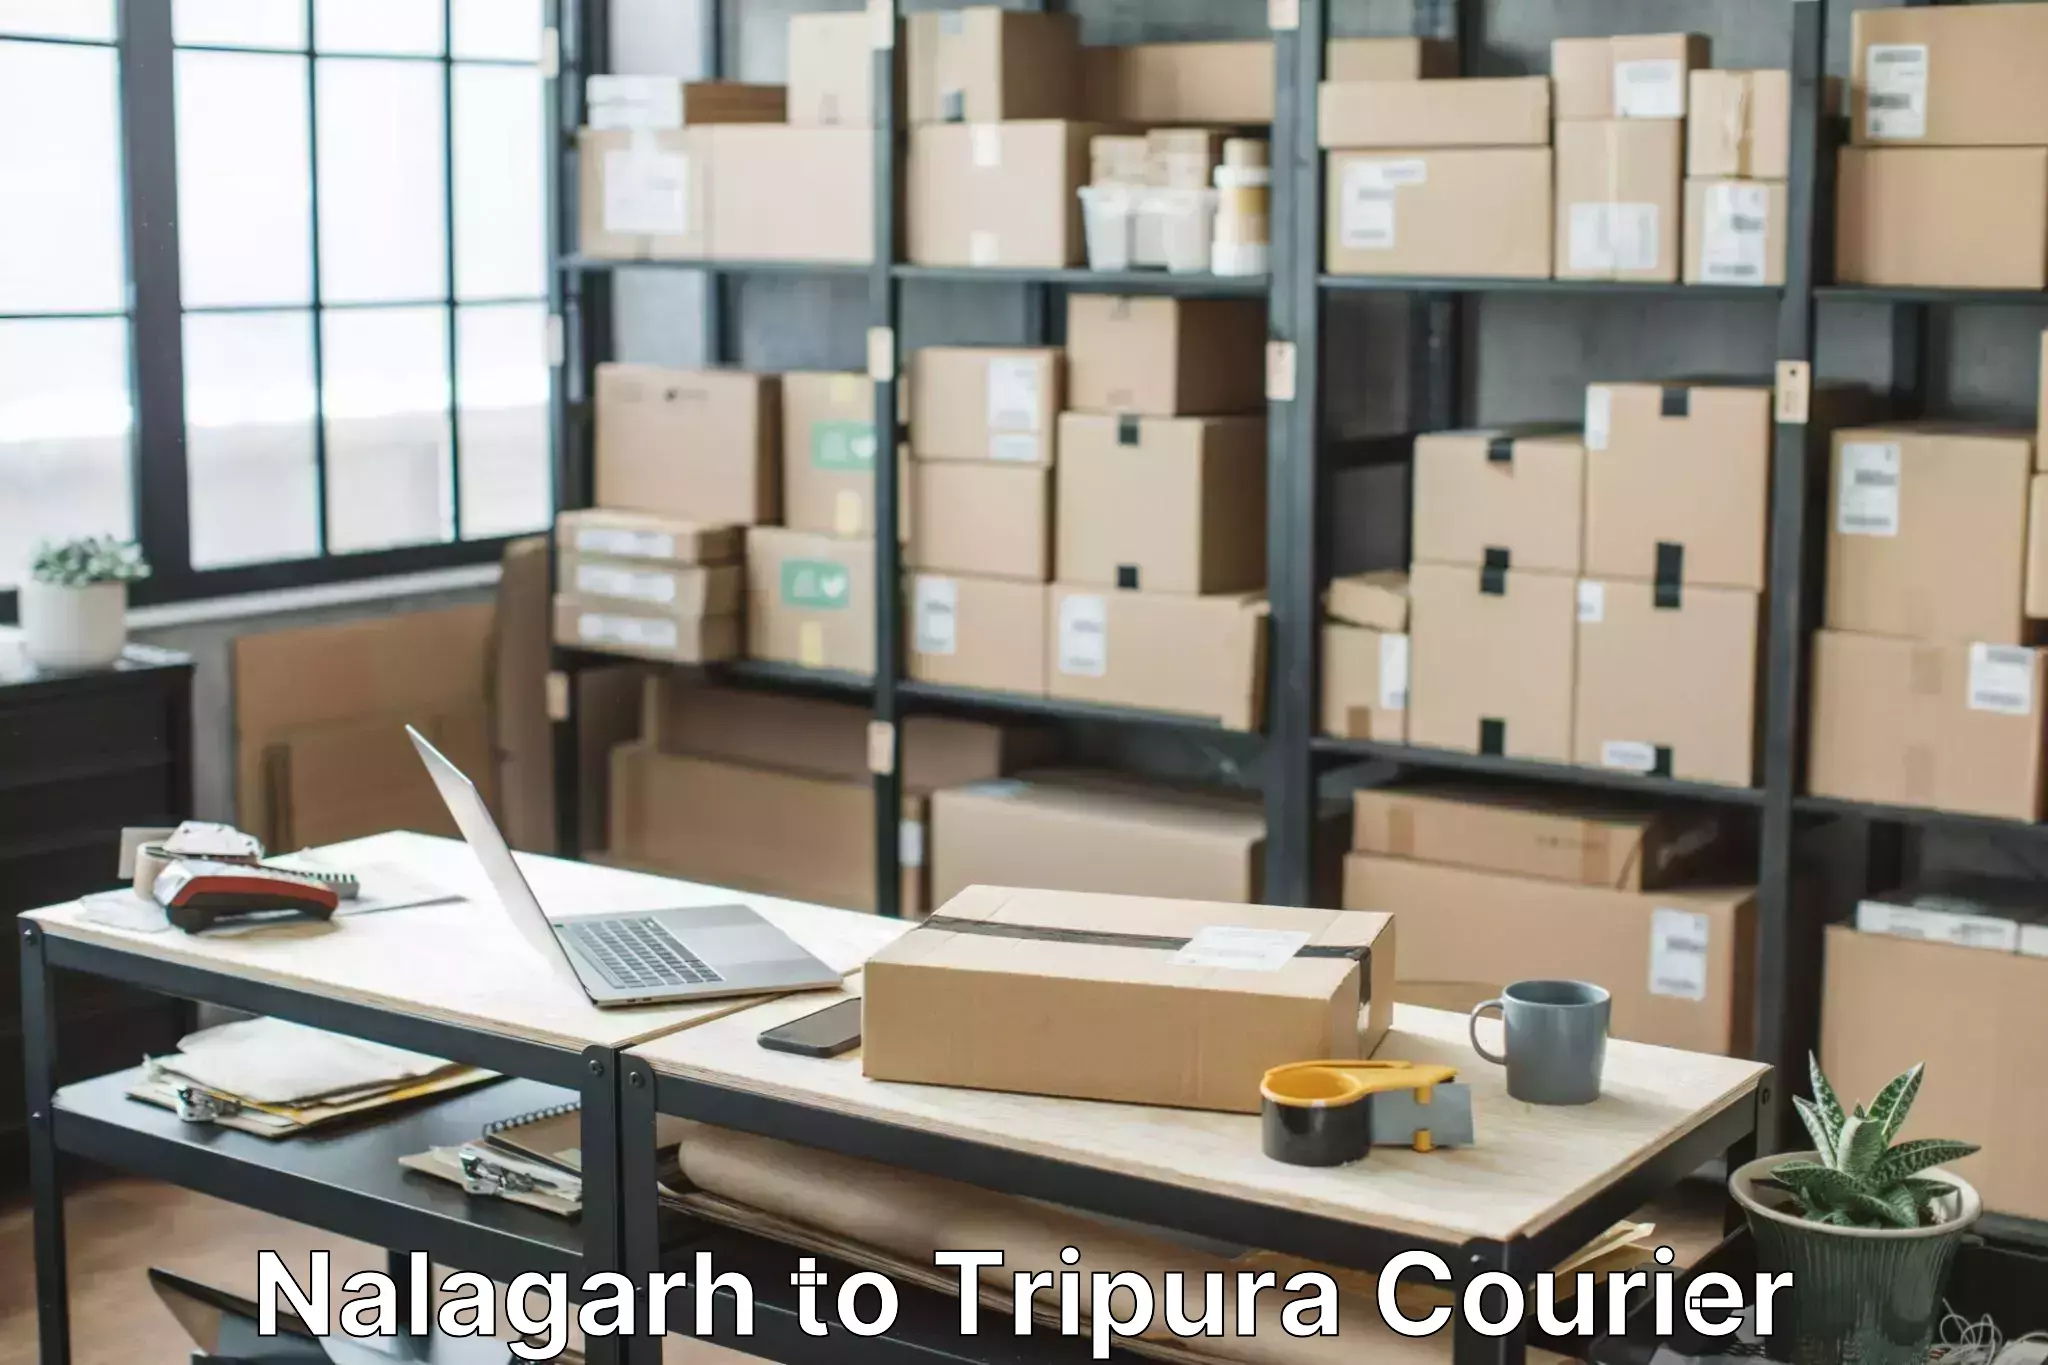 Tailored moving services Nalagarh to Udaipur Tripura